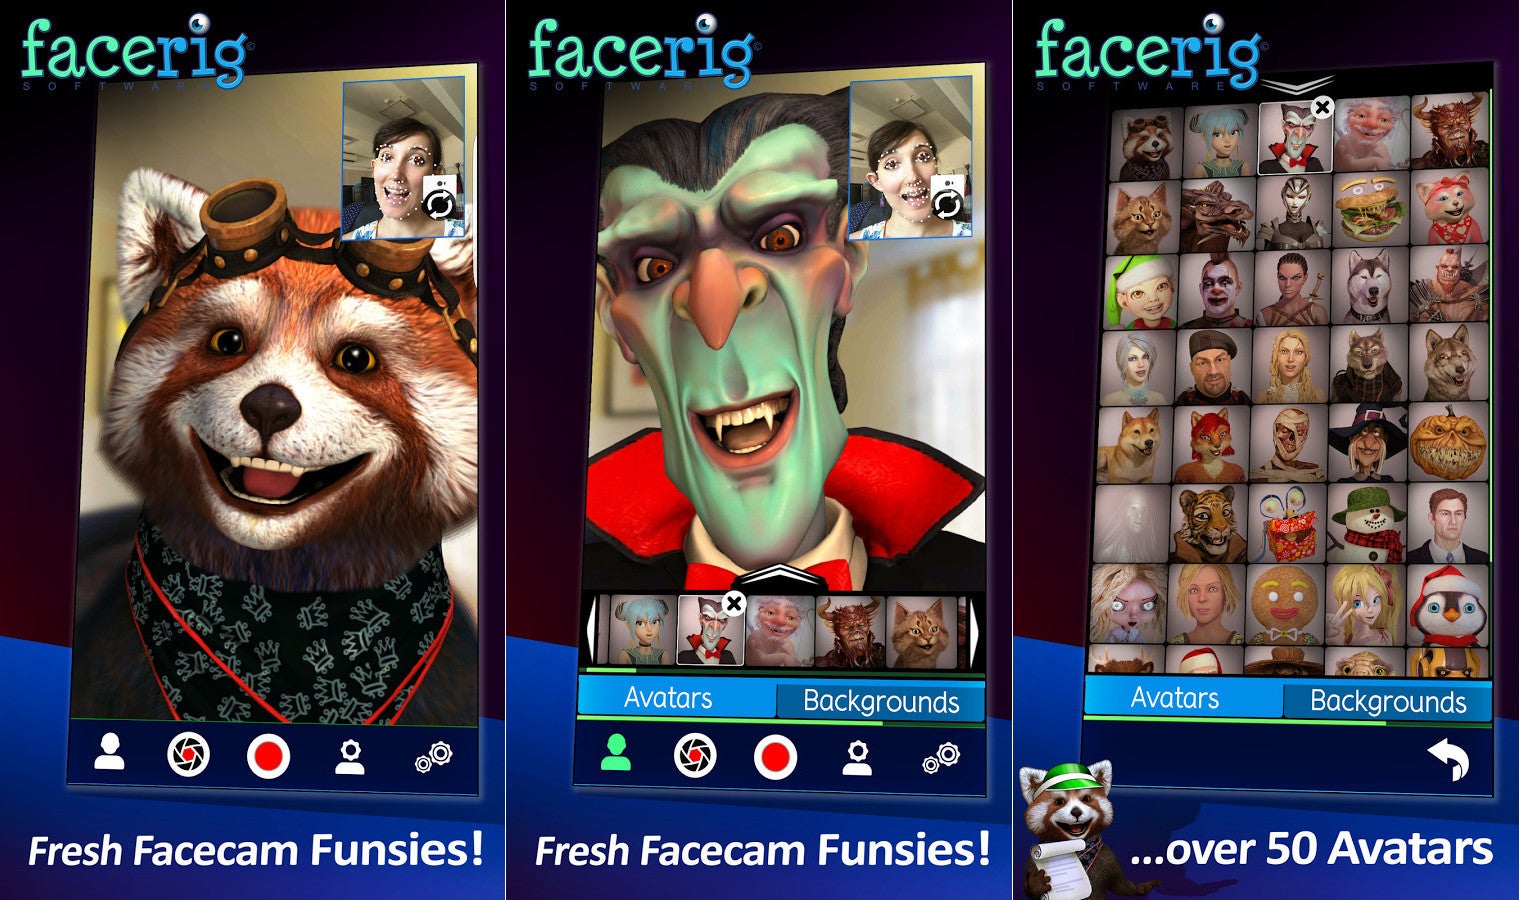 Spotlight: I've 'rigged' my face using this funny mobile app called FaceRig  - PhoneArena